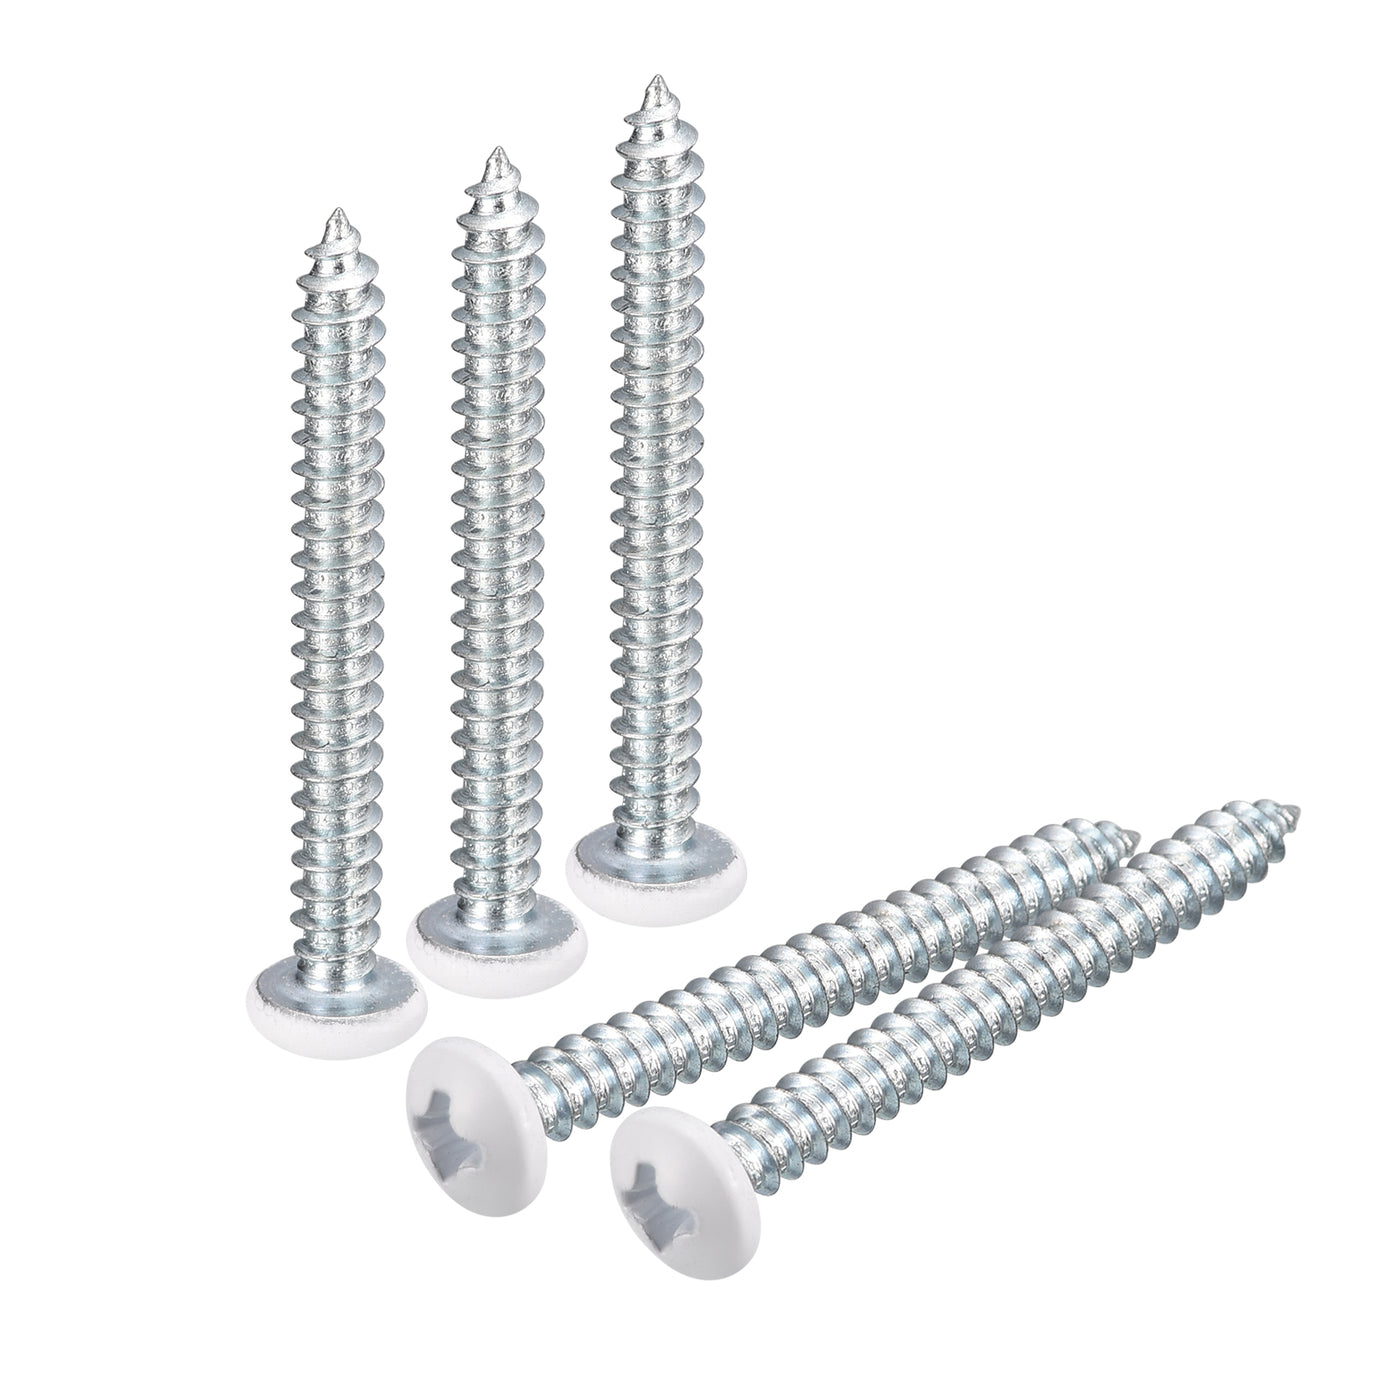 uxcell Uxcell ST4x35mm White Screws Self Tapping Screws, 25pcs Pan Head Phillips Screws